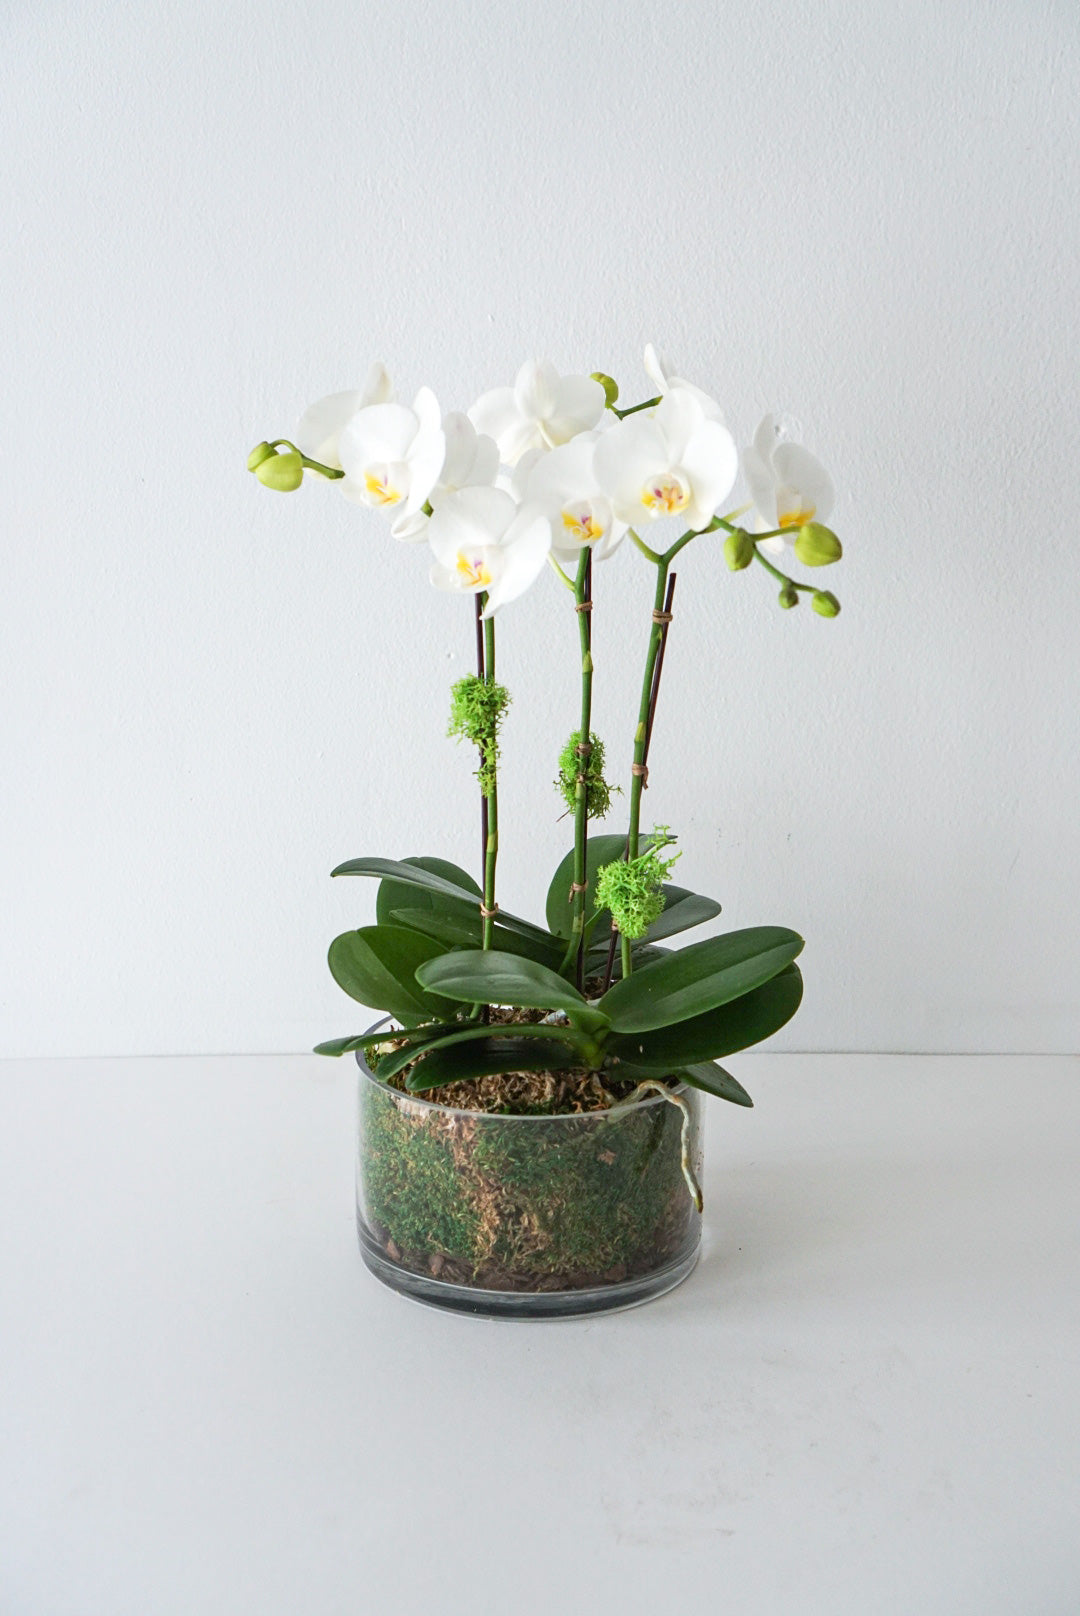 The special Phalaenopsis orchids are among the most popular and rewarding orchids, putting on a spectacular display when blooming, which can last 2-3 months. They are easy to care for if given proper care, they can re-bloom for years to come.  Beautiful petite orchid potted in a 3.5" bowl and decoration. Our orchids are supplied by the best grower in the market!